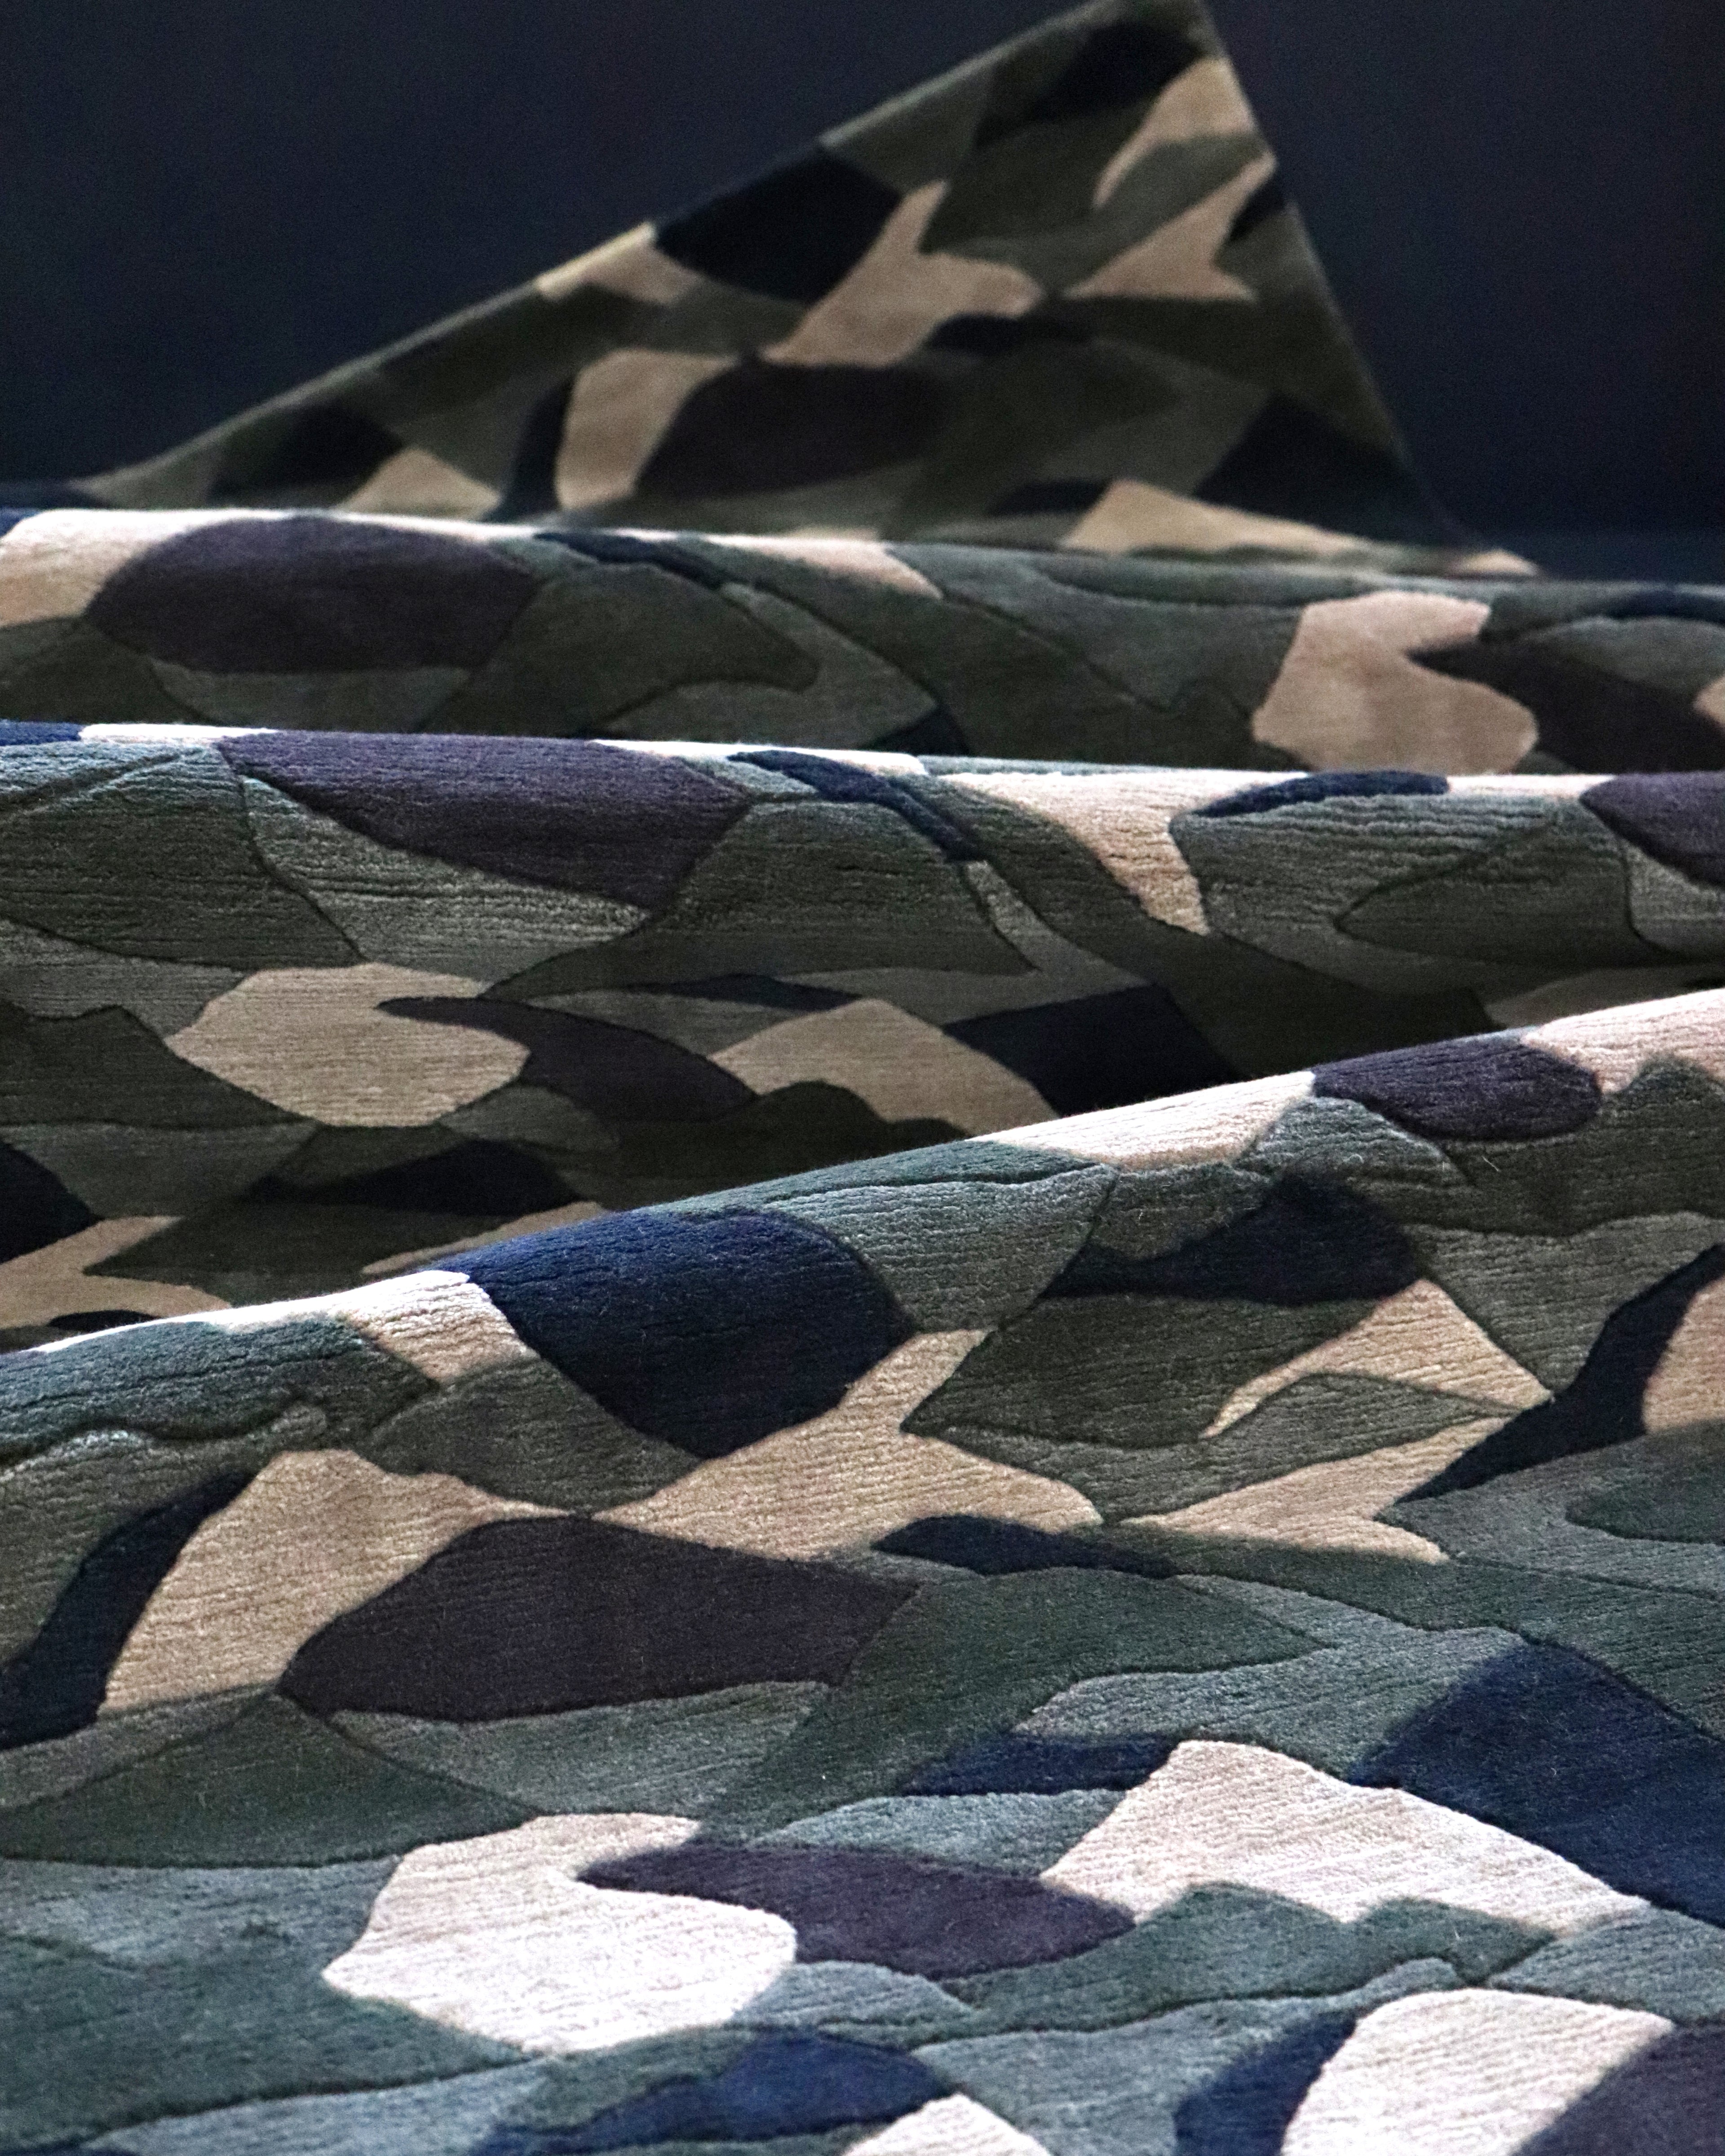 A close up of camouflage fabric on a bed